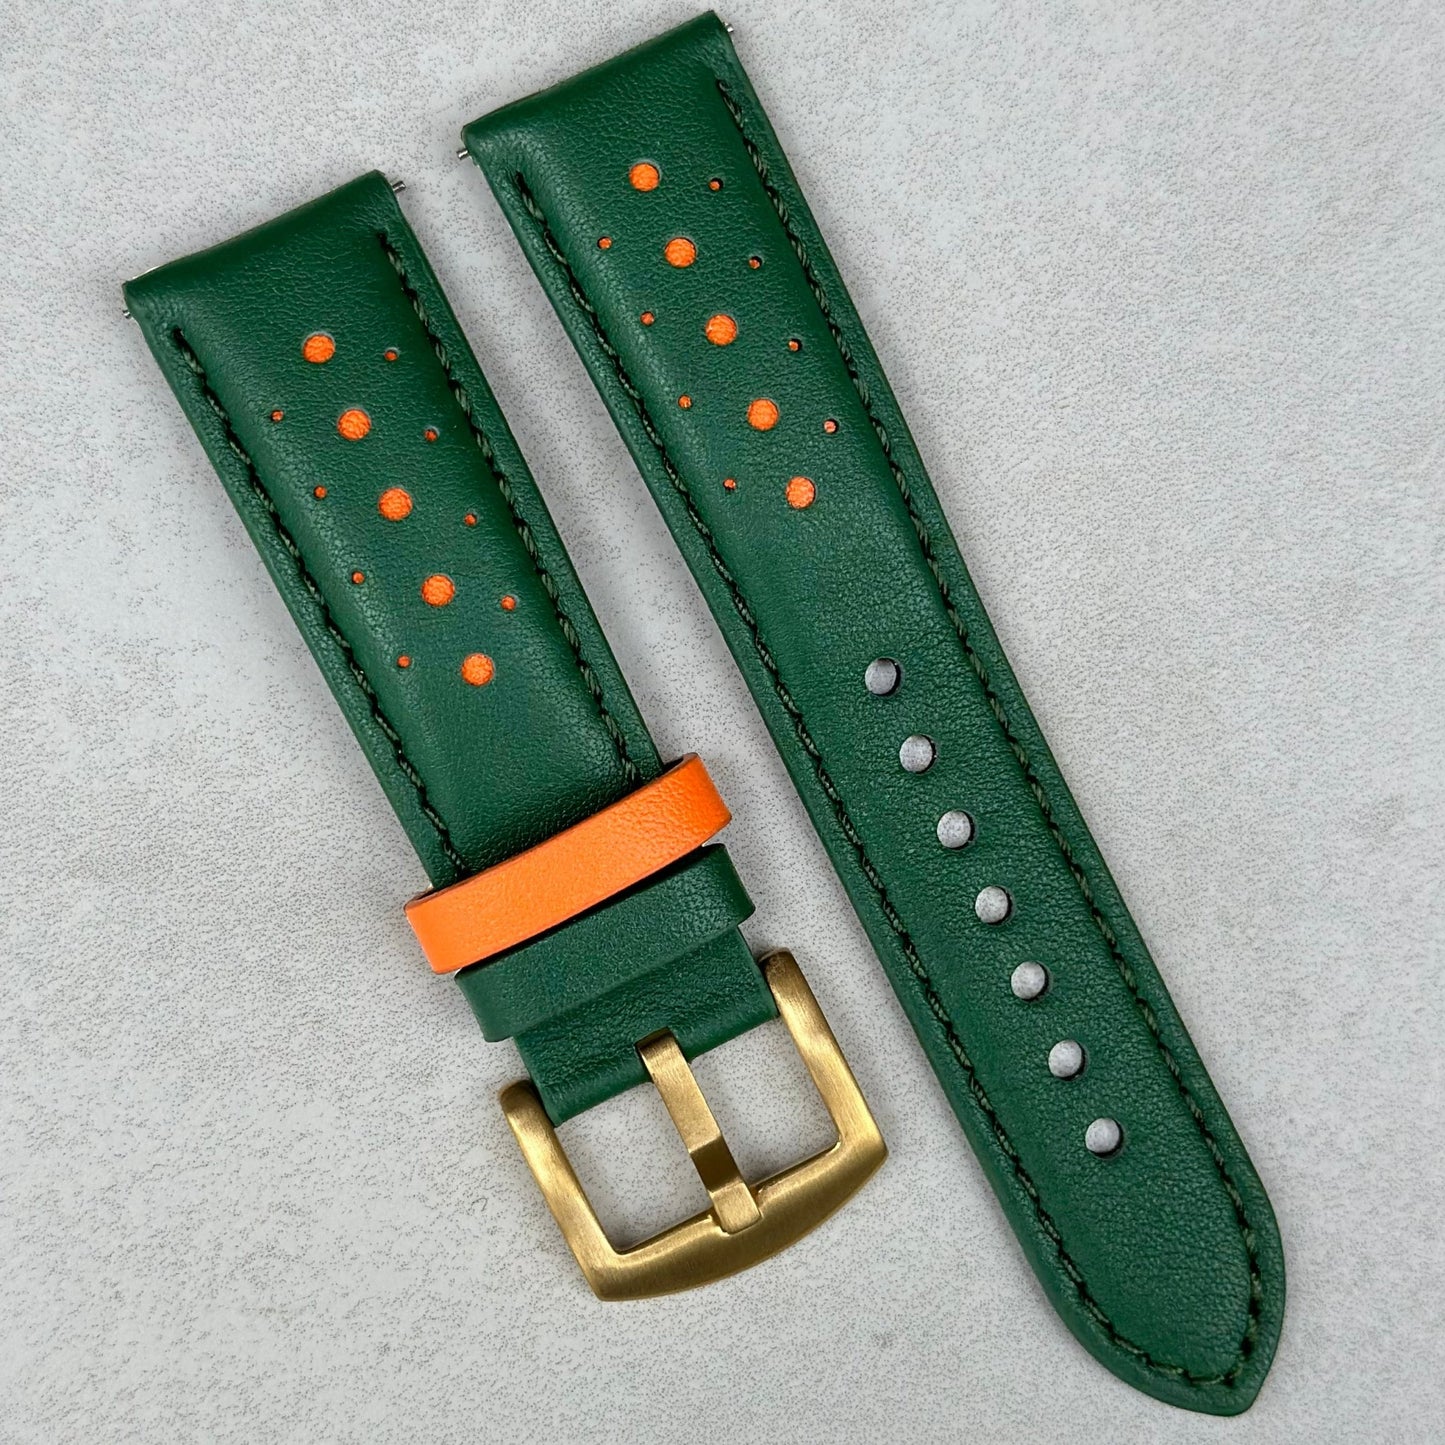 Le Mans green and orange leather watch strap, fitted with the brushed gold 316L stainless steel buckle.